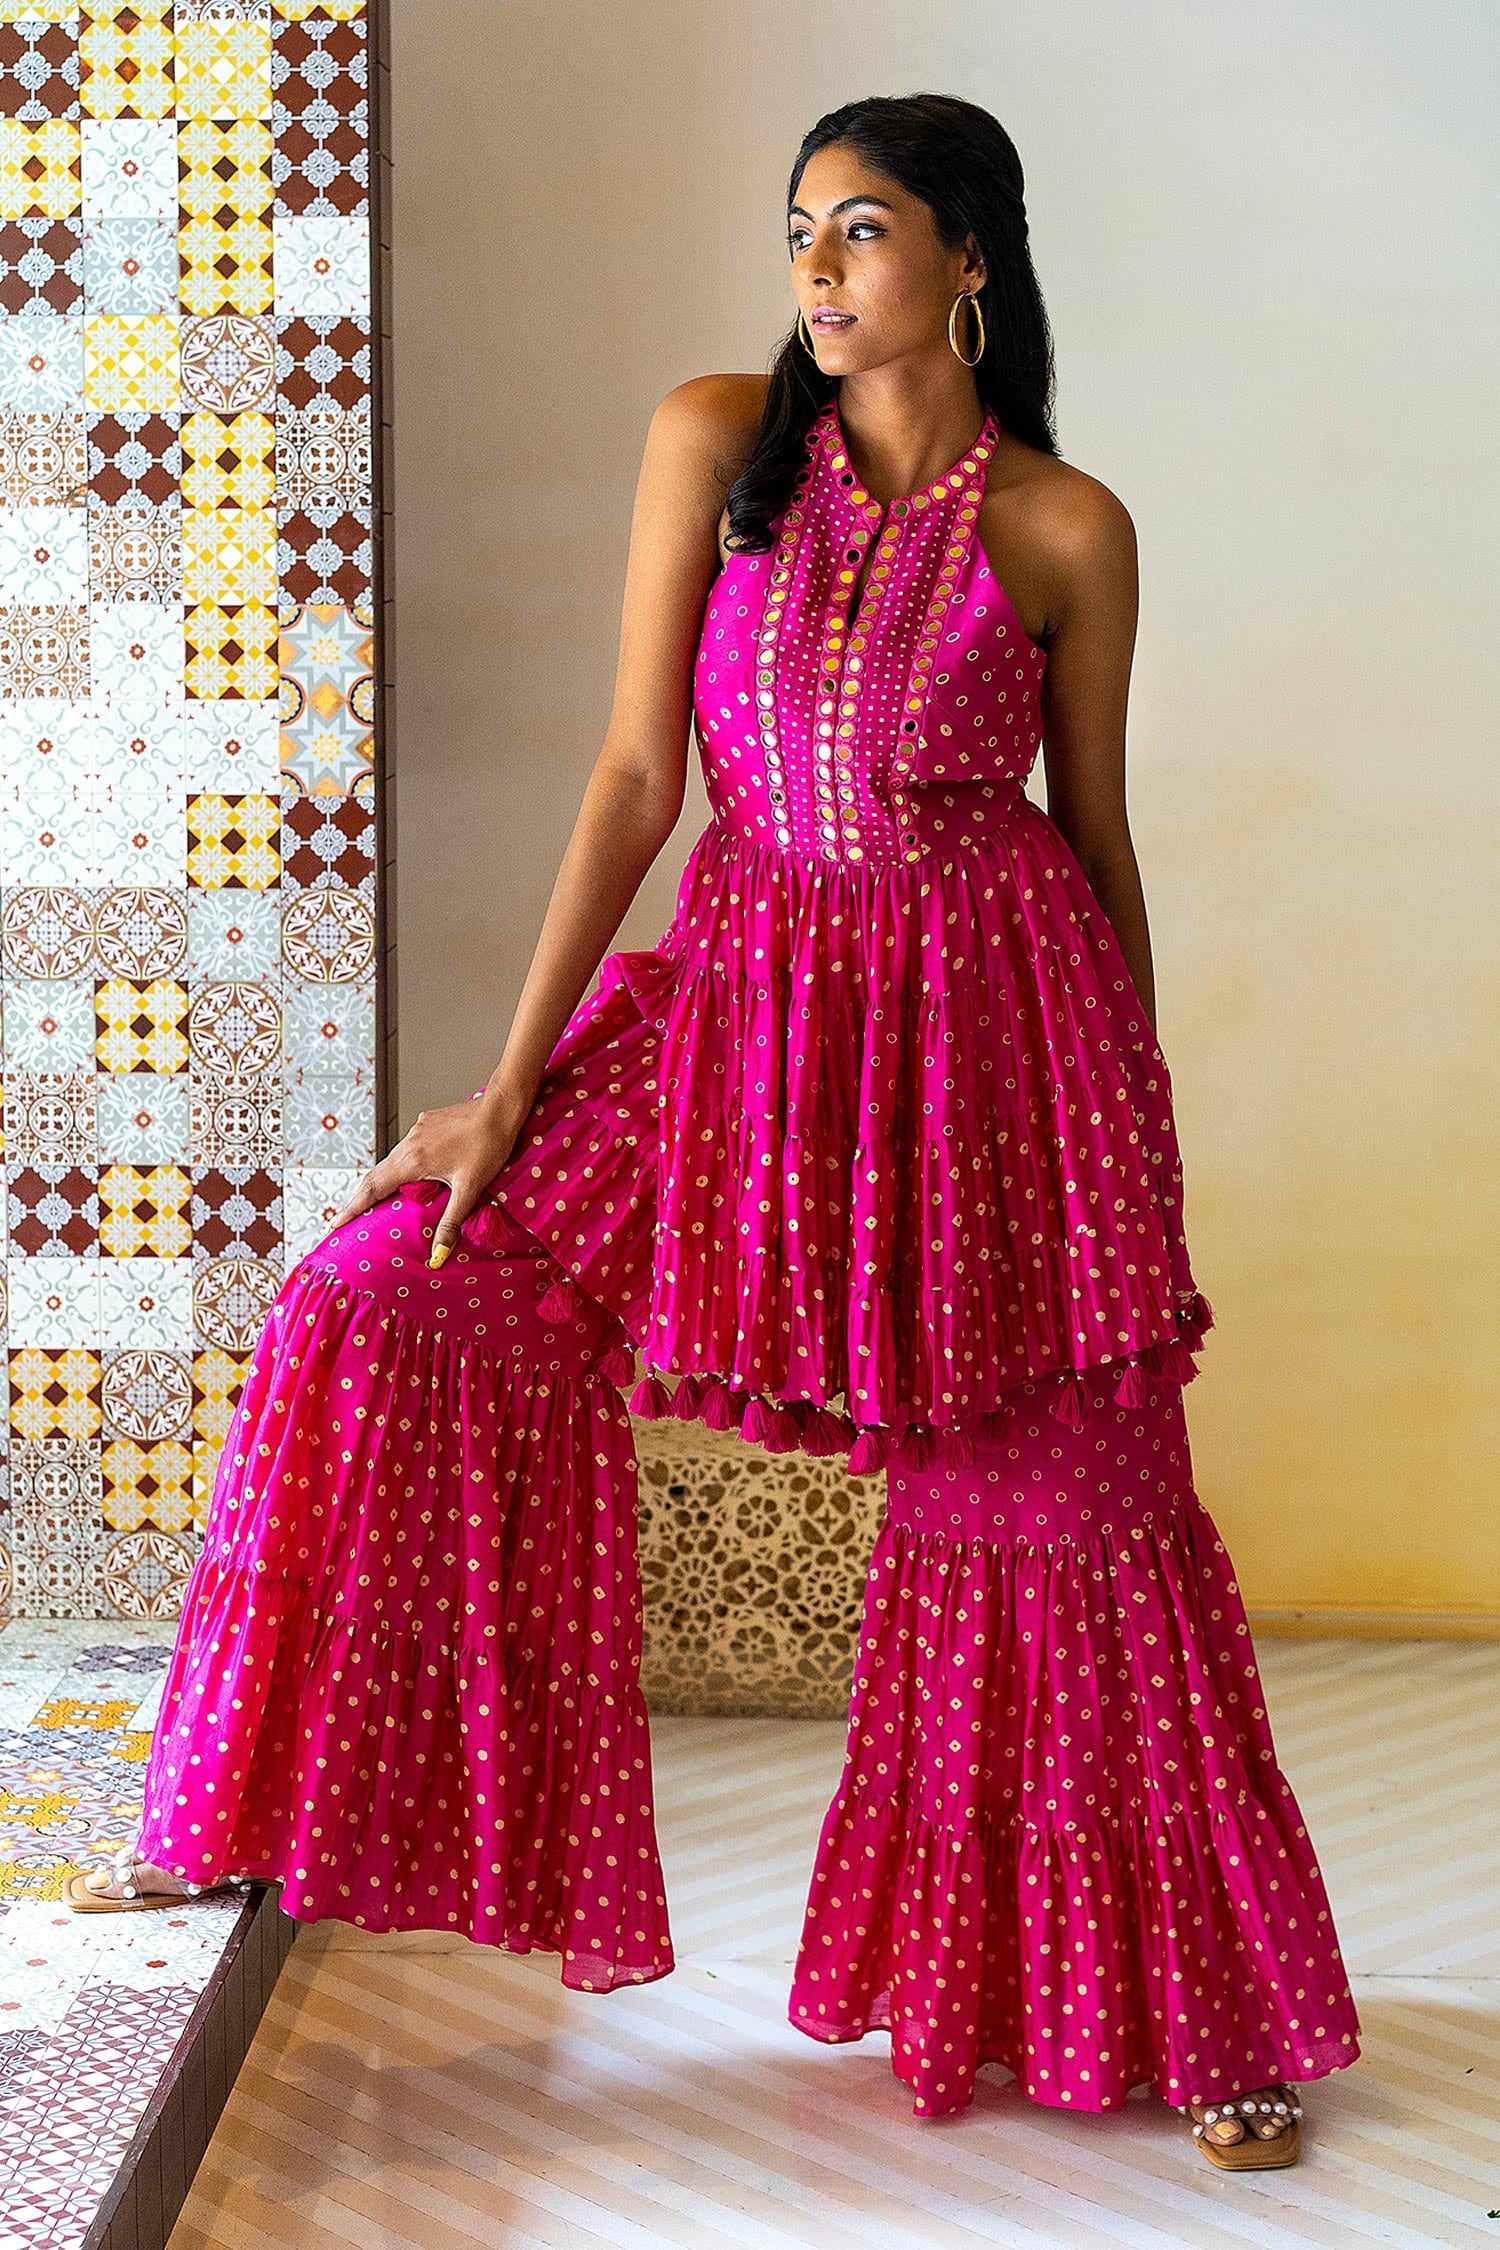 Aggregate 80+ bandhani gown pattern best